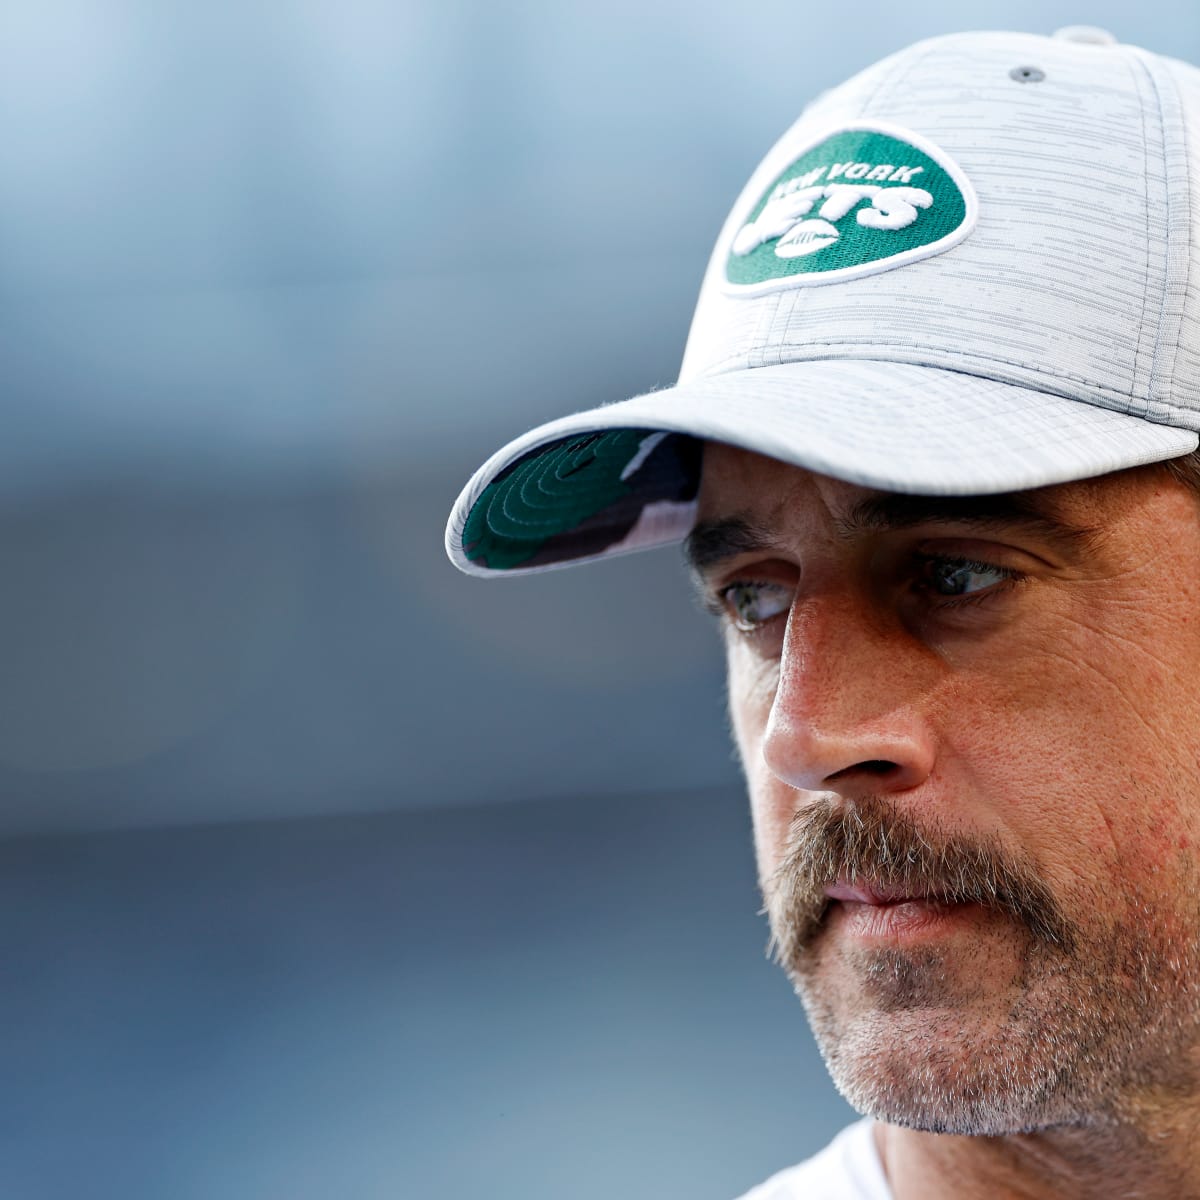 NFL legend open to unretiring his number if Aaron Rodgers joins New York  Jets - Mirror Online